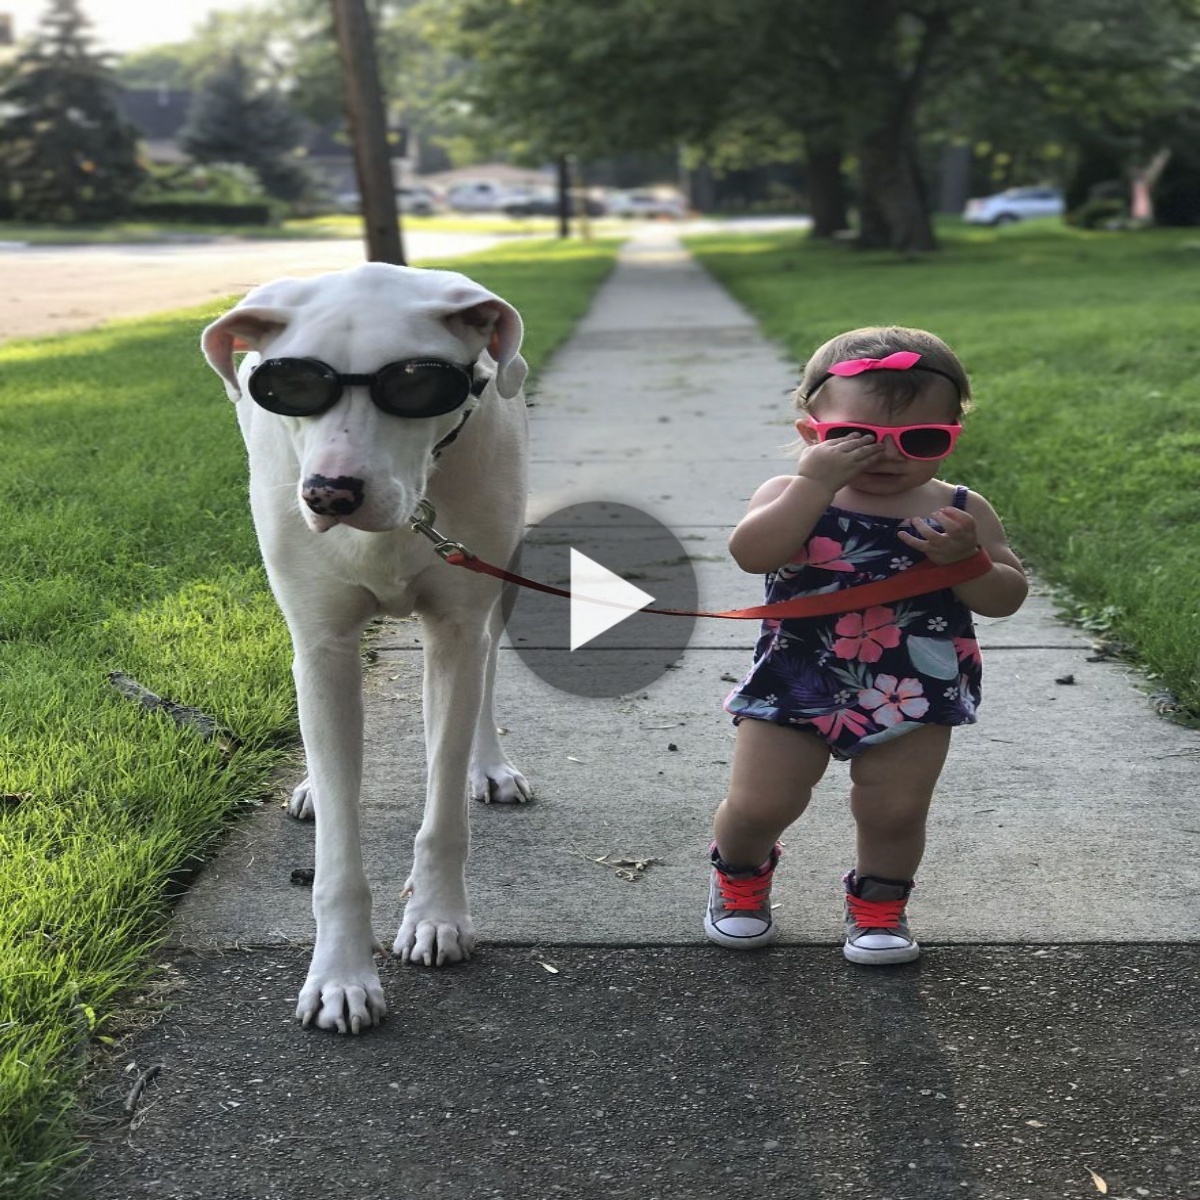 A little girl took her dog for a walk and wore glasses to go out, looking cool as a model, capturing interesting moments of the two that made everyone laugh.